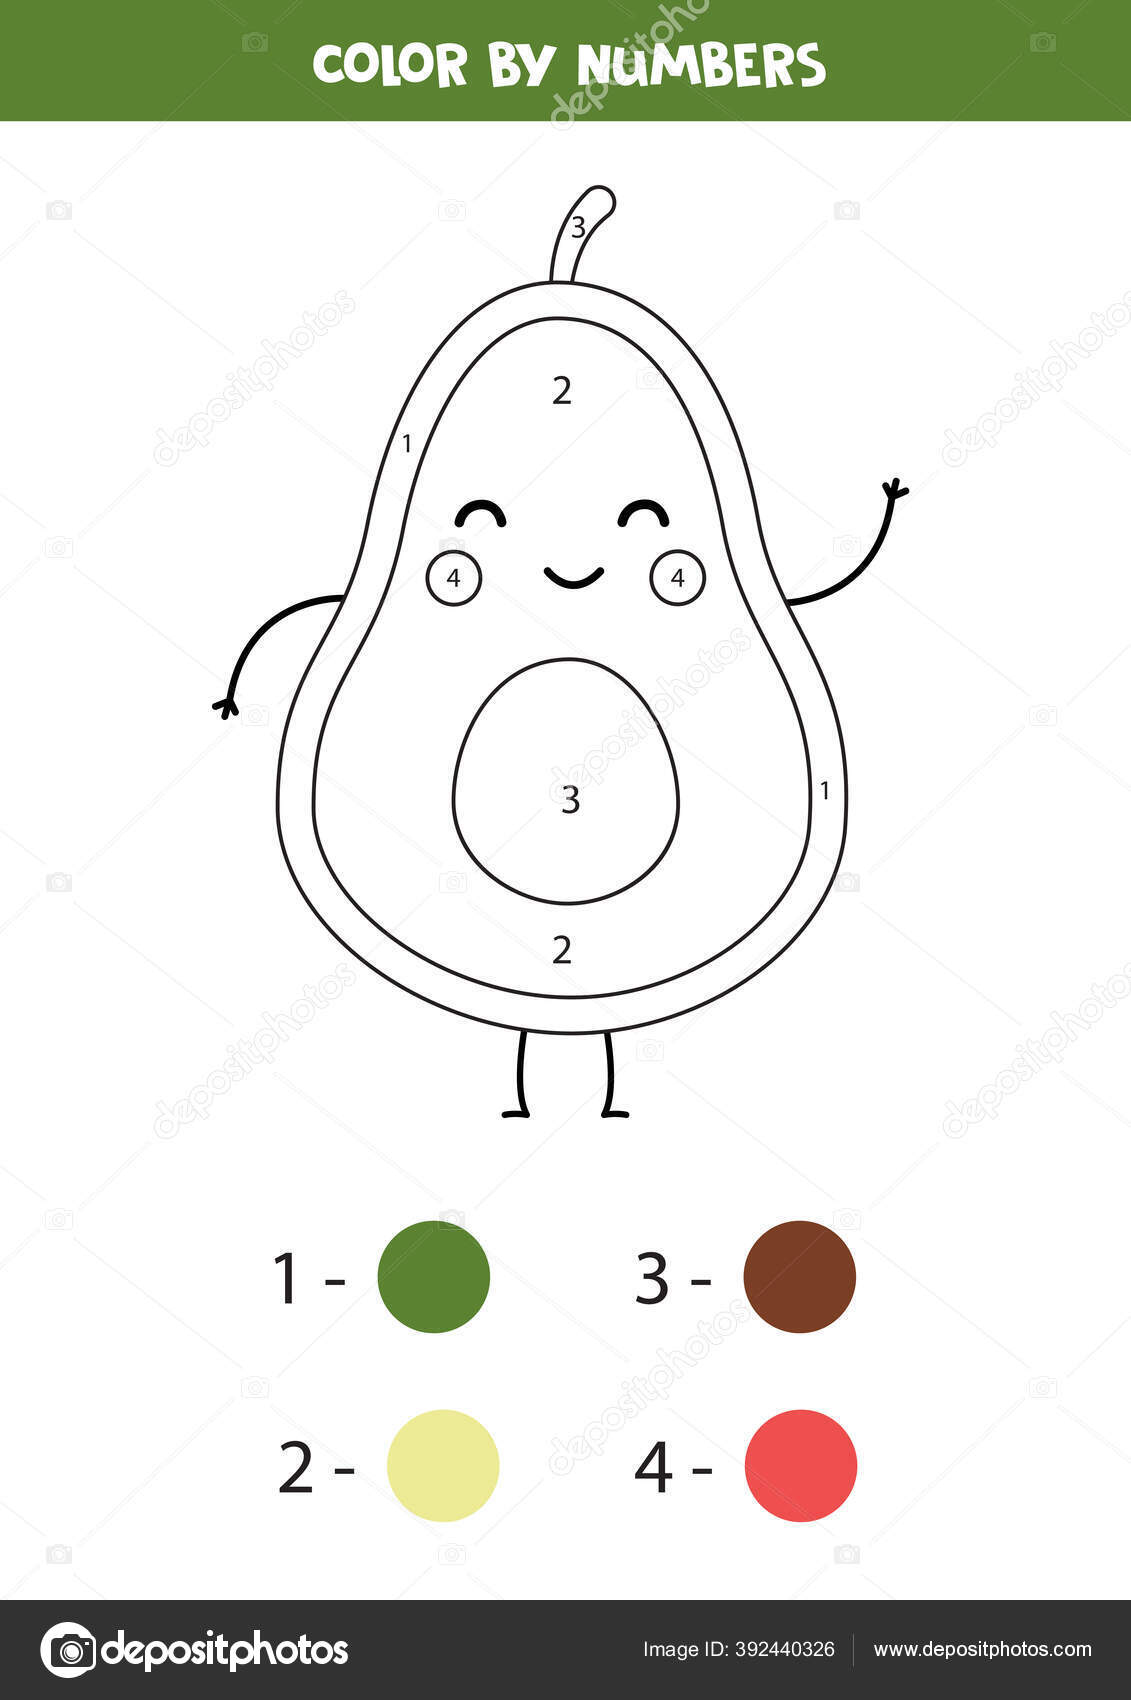 Cute Avocado Coloring Page Color By Numbers Stock Vector Royalty Free Vector Image By C Milya24 392440326